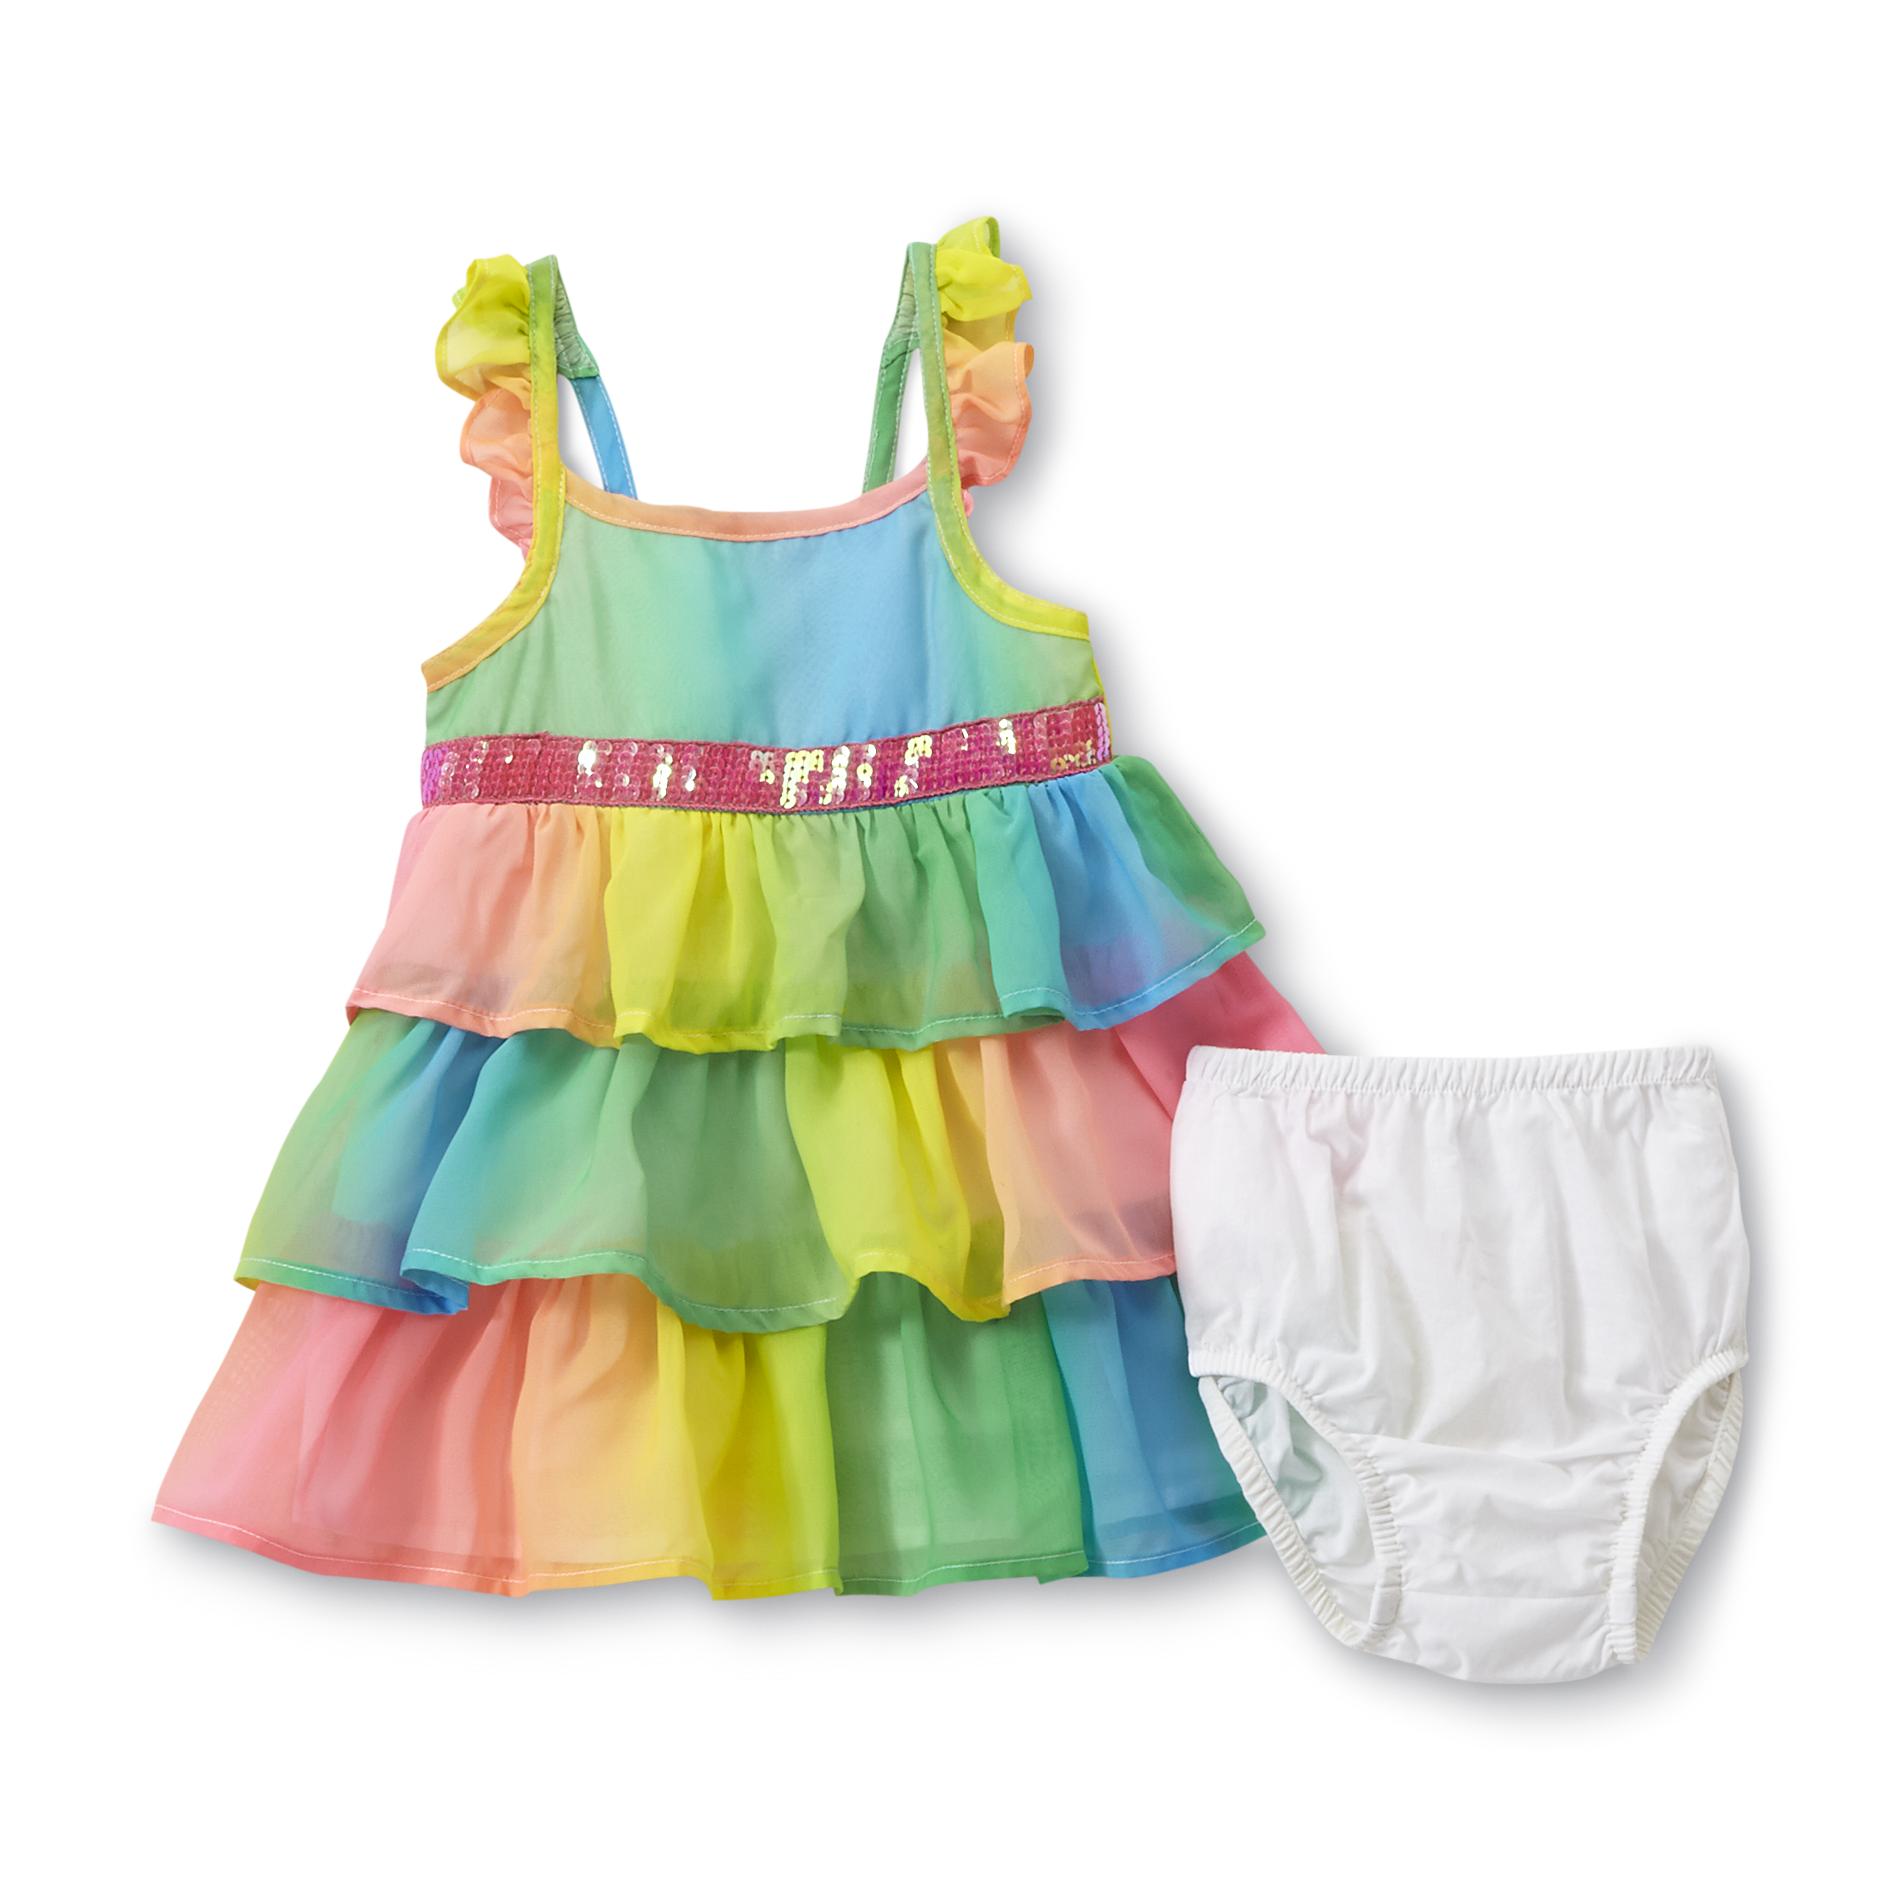 Piper Baby Infant & Toddler Girl's Tiered Dress & Diaper Cover - Tie-Dye